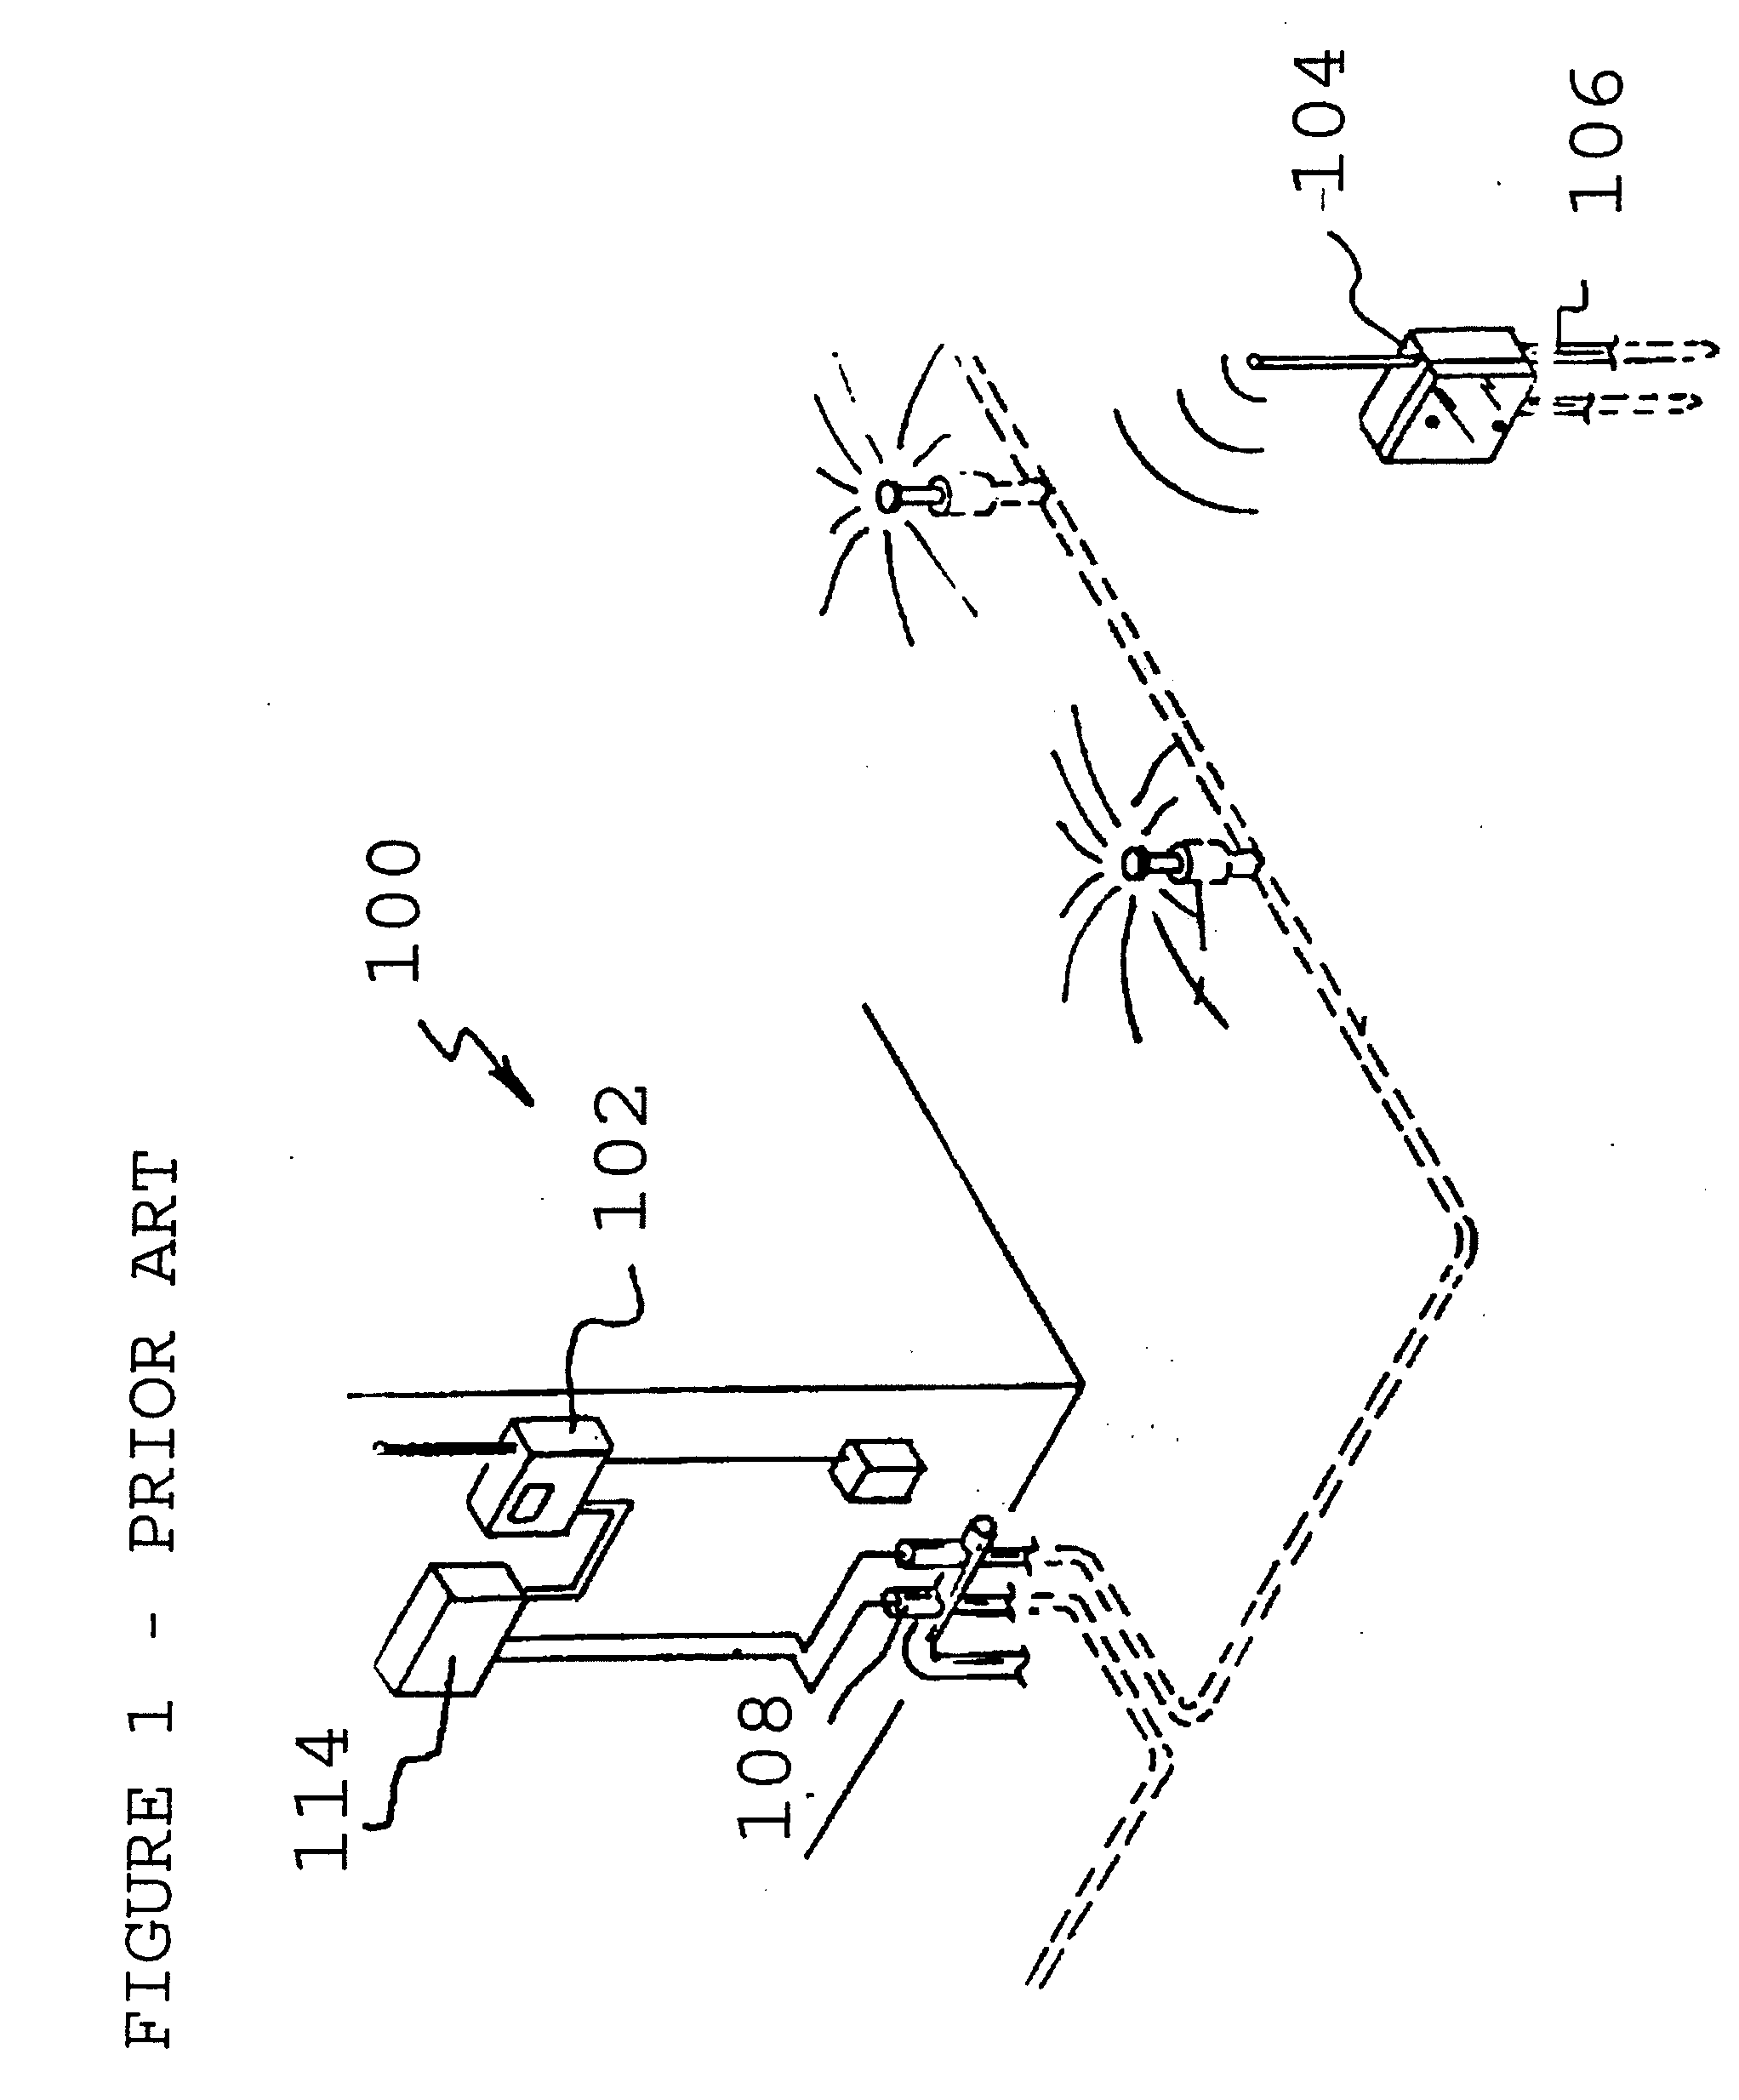 Two-wire control of sprinkler system